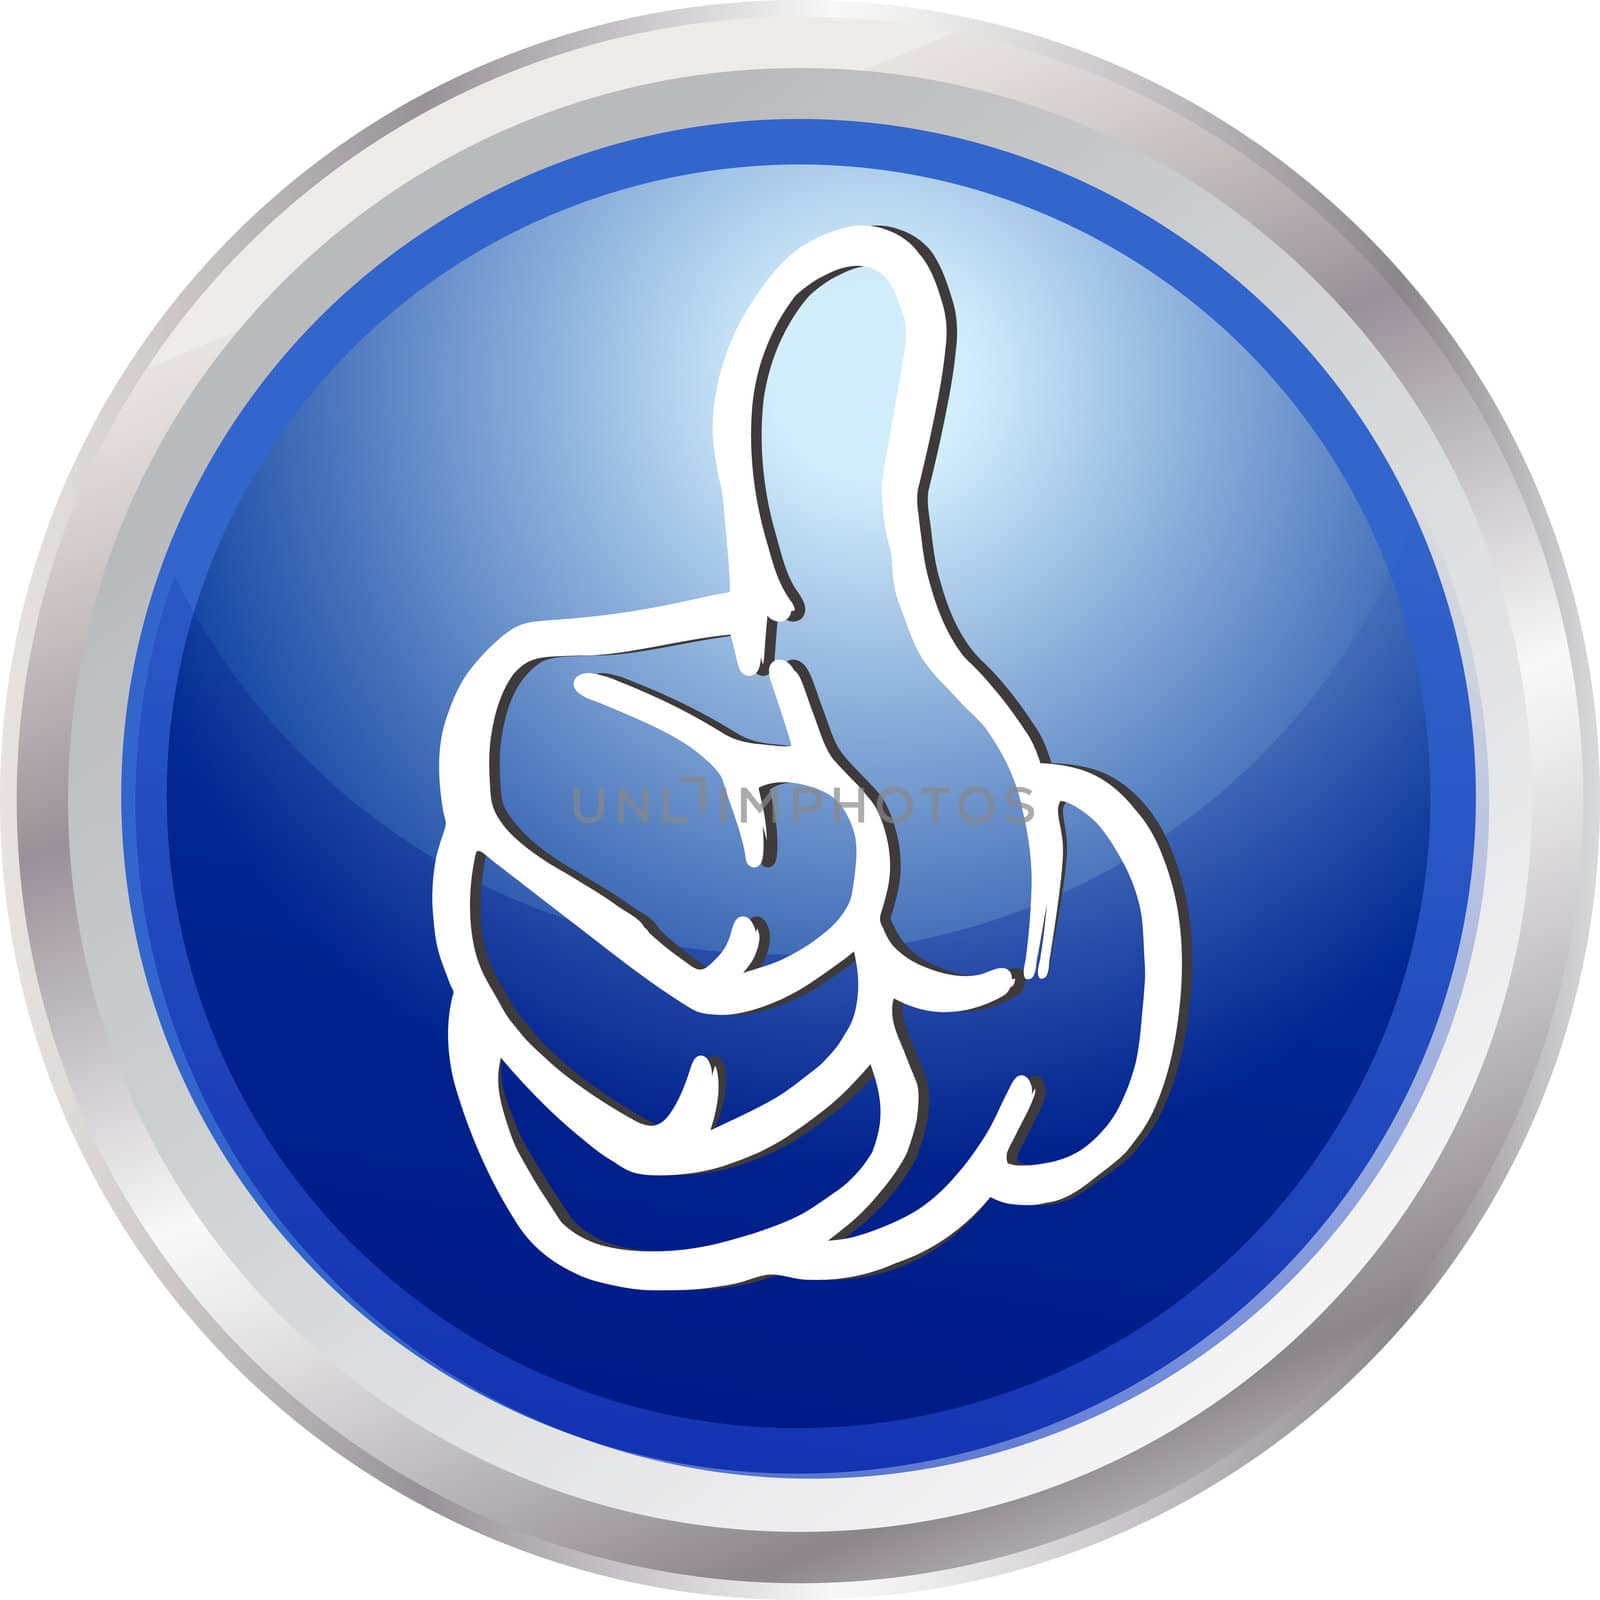 3D button thumb up by peromarketing